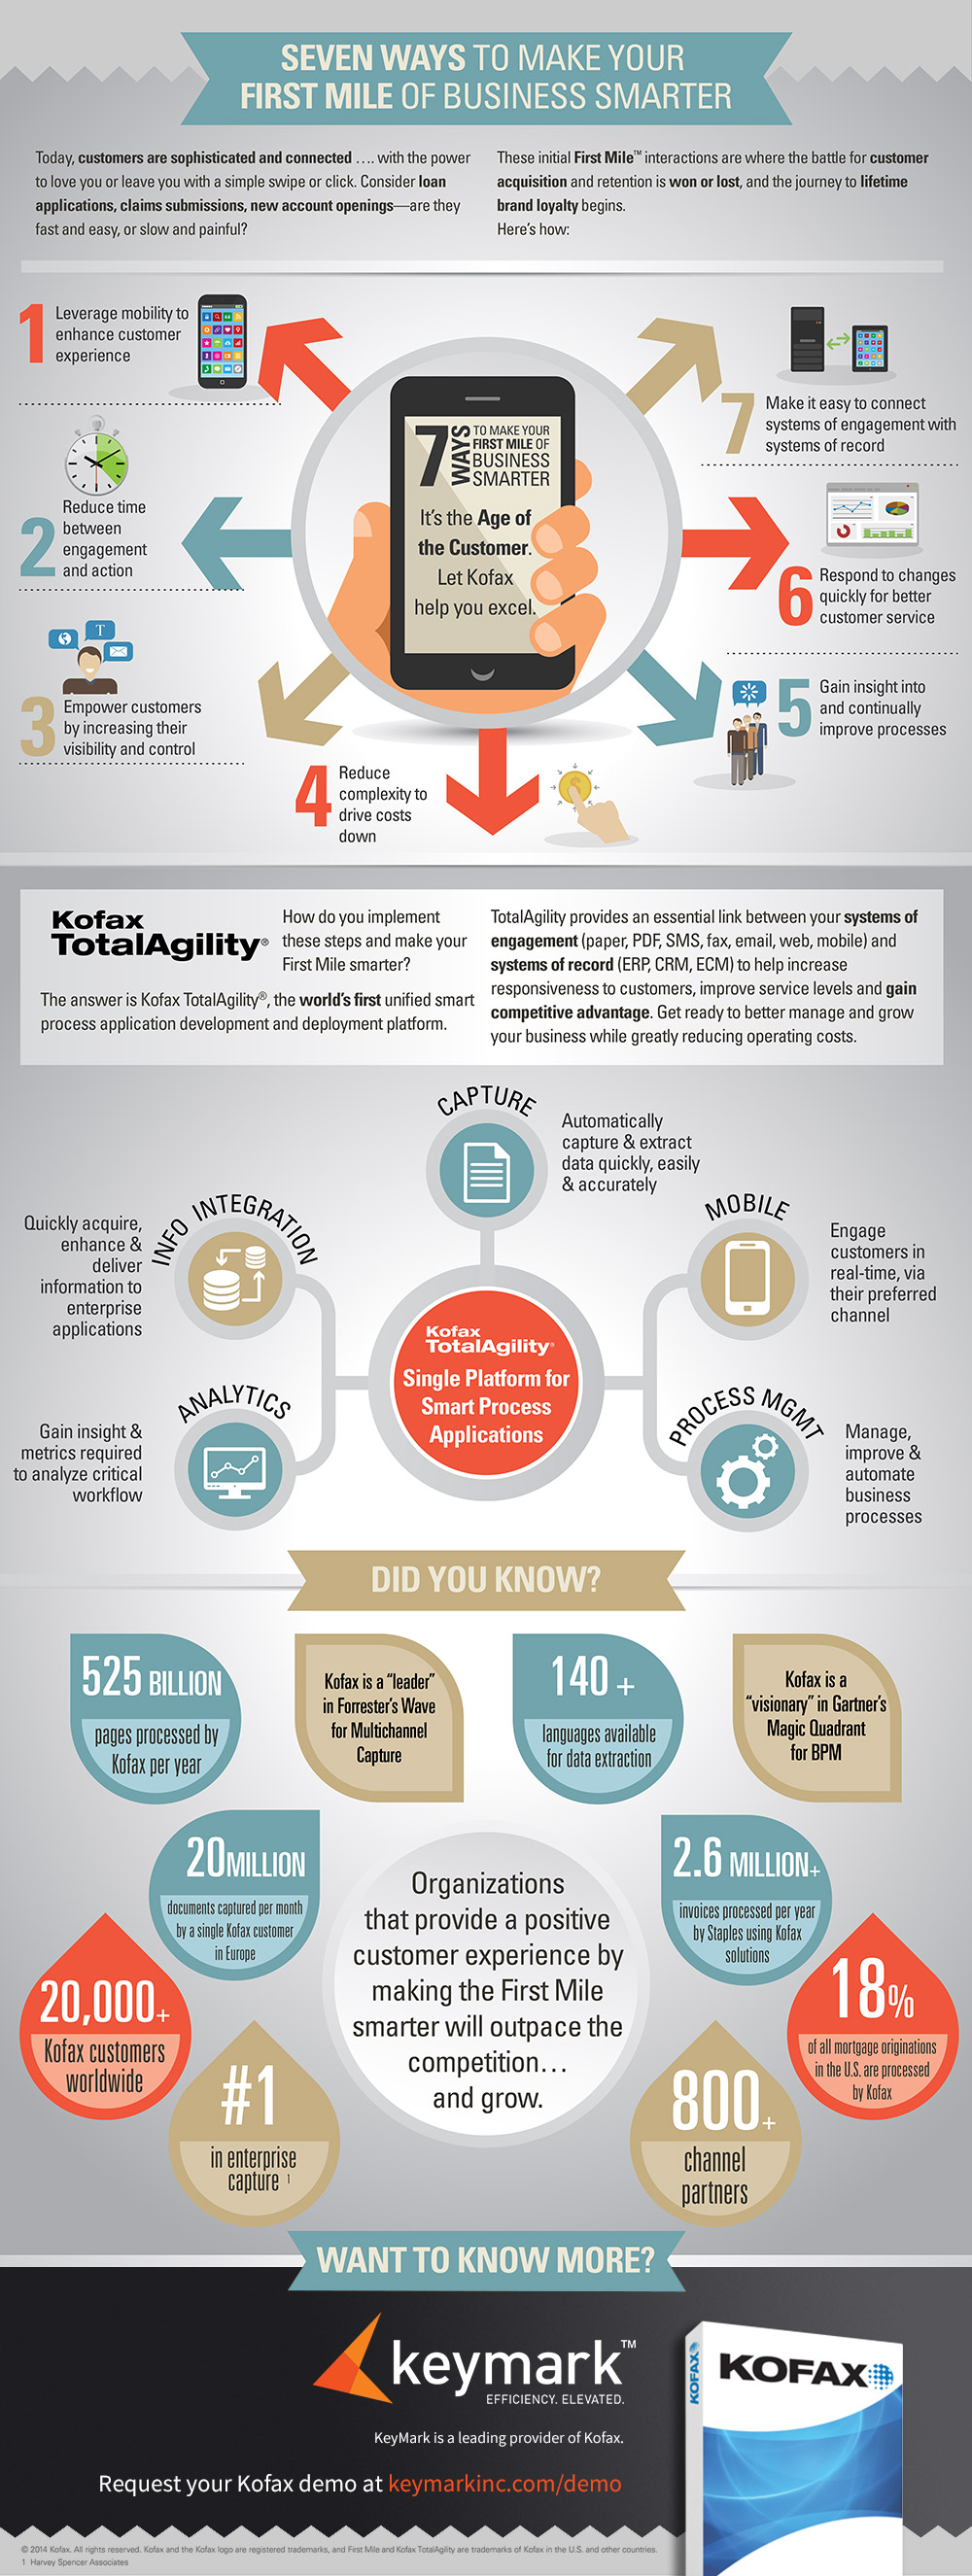 infographic-kofax-reseller-seven-ways-to-make-business-smarter